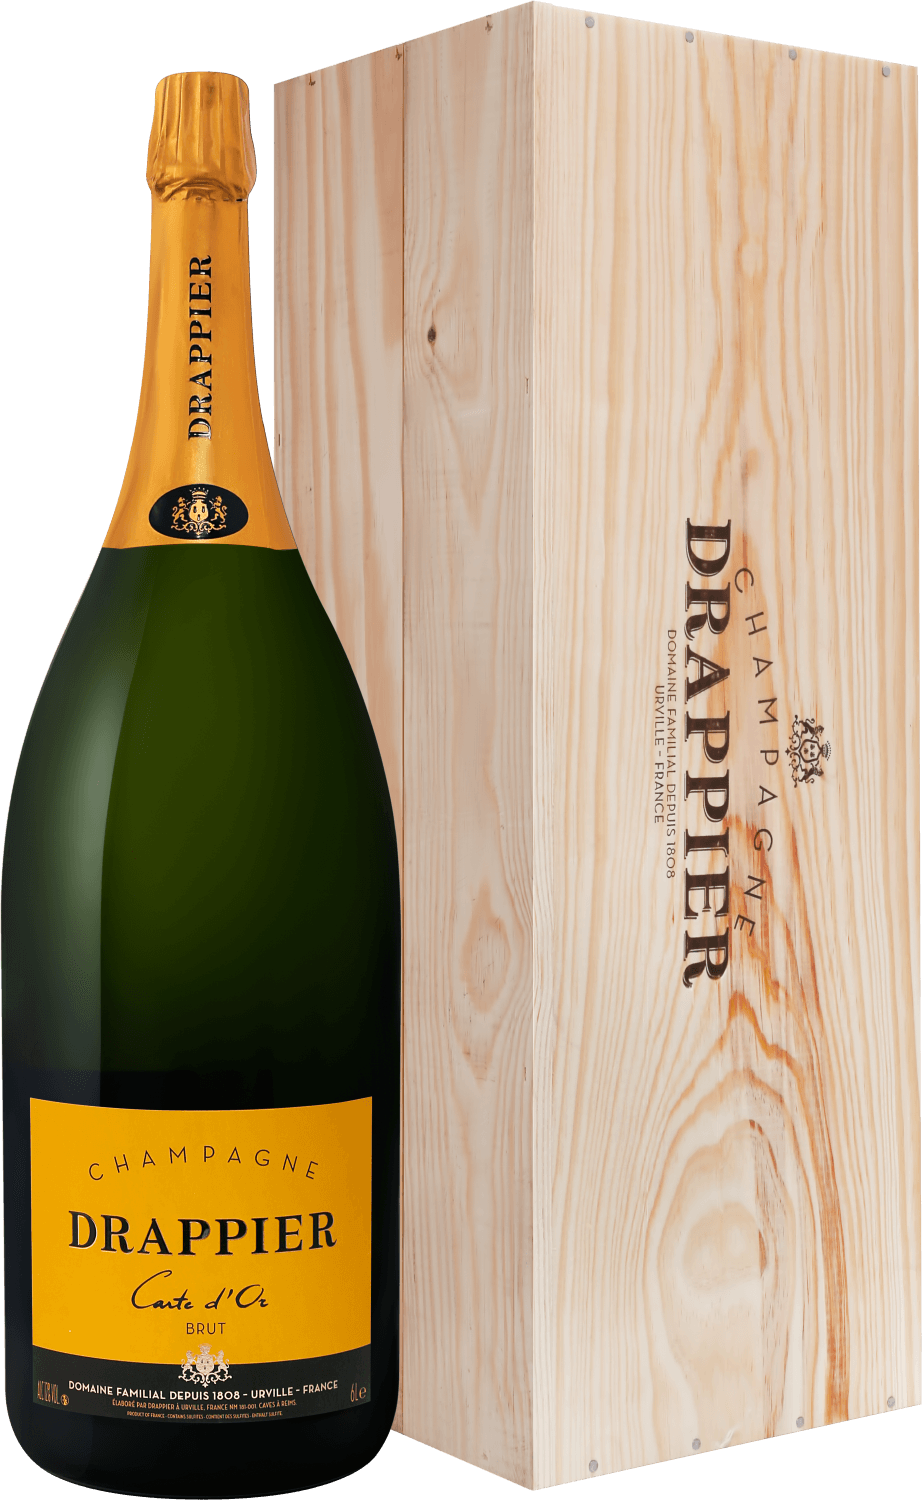 Drappier Carte d’Or Brut Champagne AOP in gift box drappier brut nature zero dosage champagne aop gift box